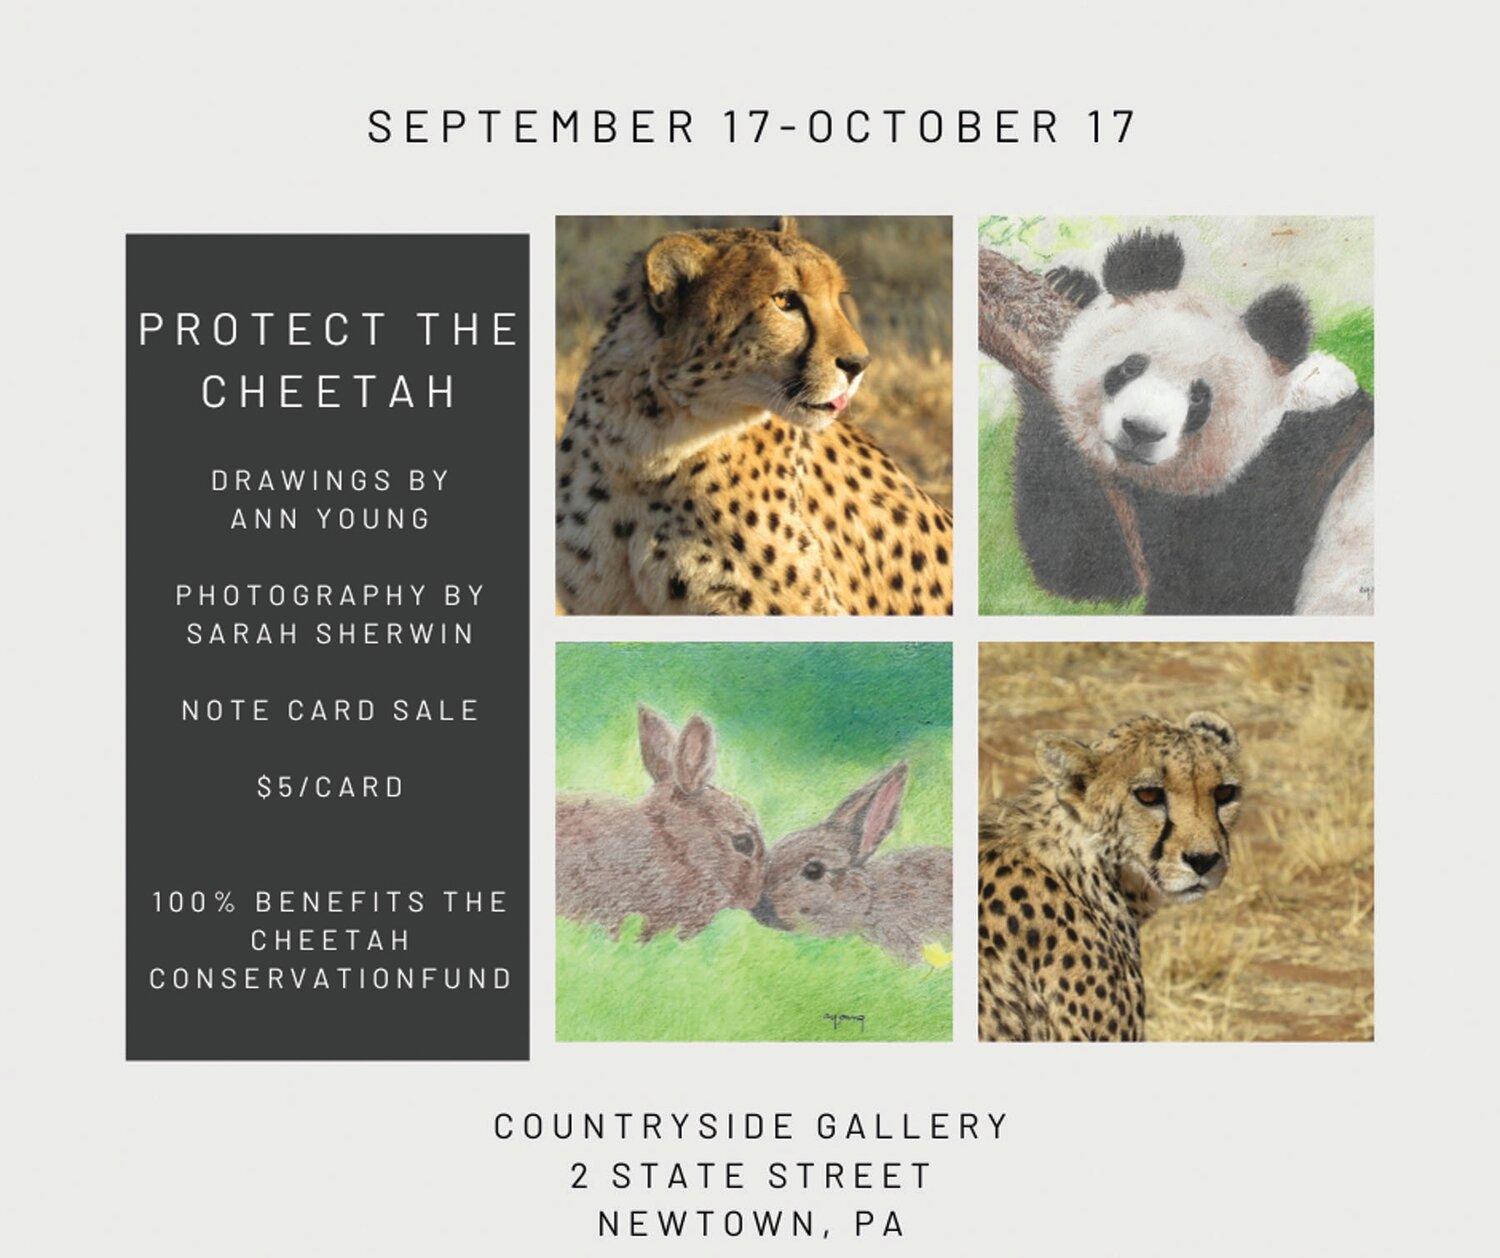 Note cards will be sold at Countryside Gallery to benefit the Cheetah Conservation Fund.